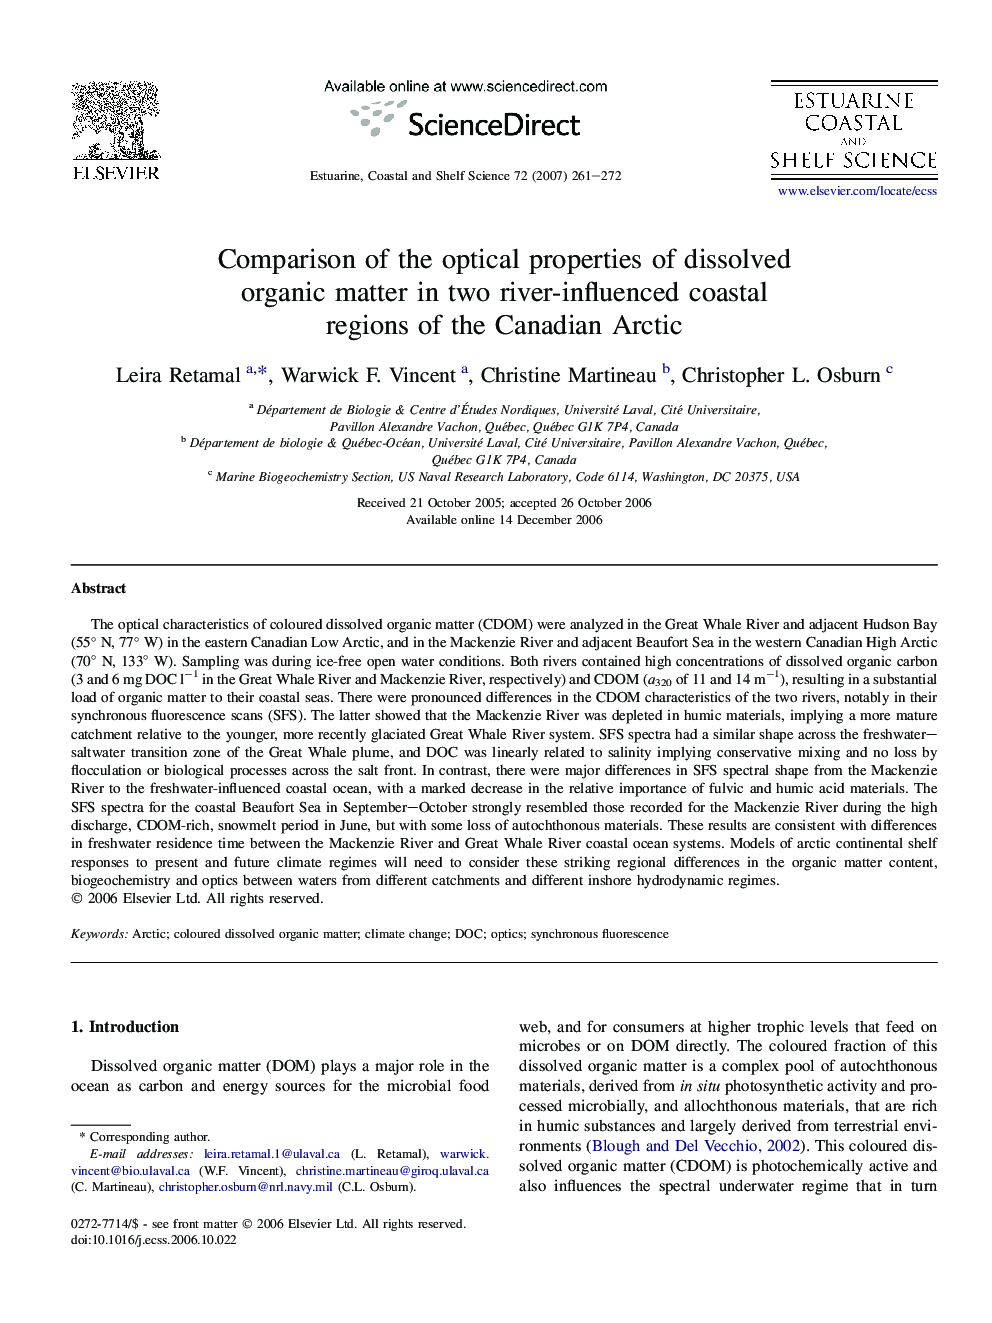 Comparison of the optical properties of dissolved organic matter in two river-influenced coastal regions of the Canadian Arctic